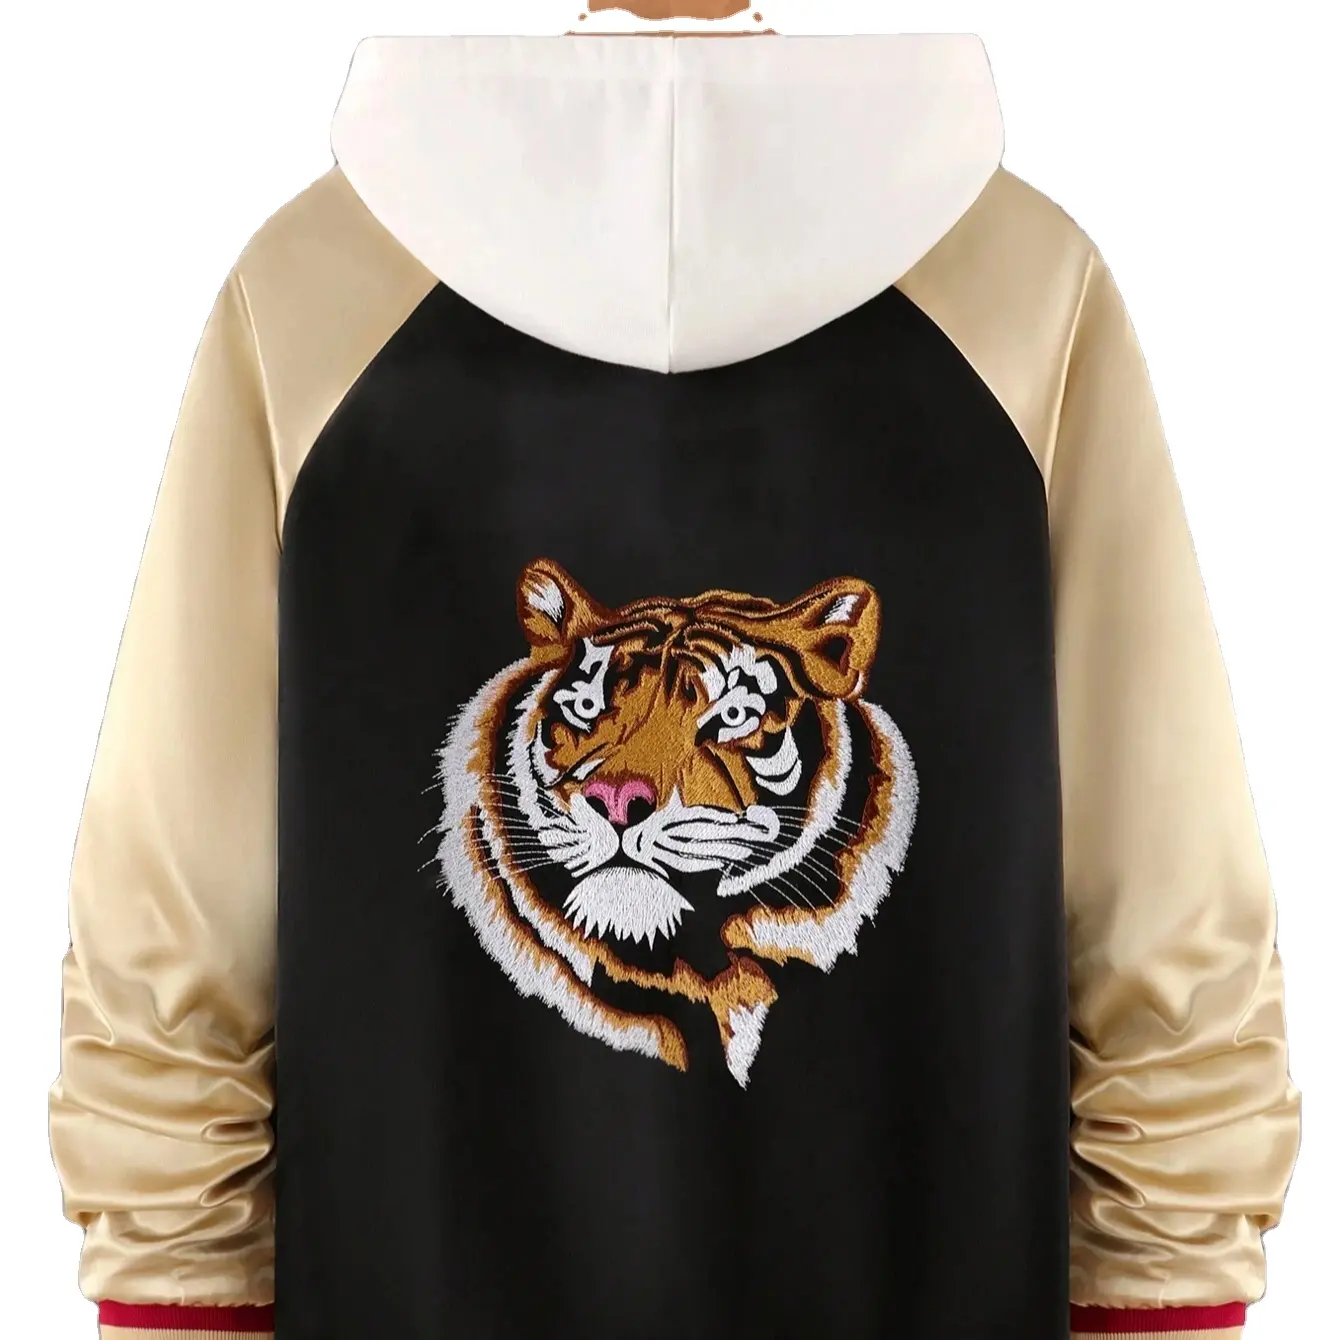 Men Varsity Jackets With Full Customization Print Letterman jacket With Embroidery Patches In Best Quality